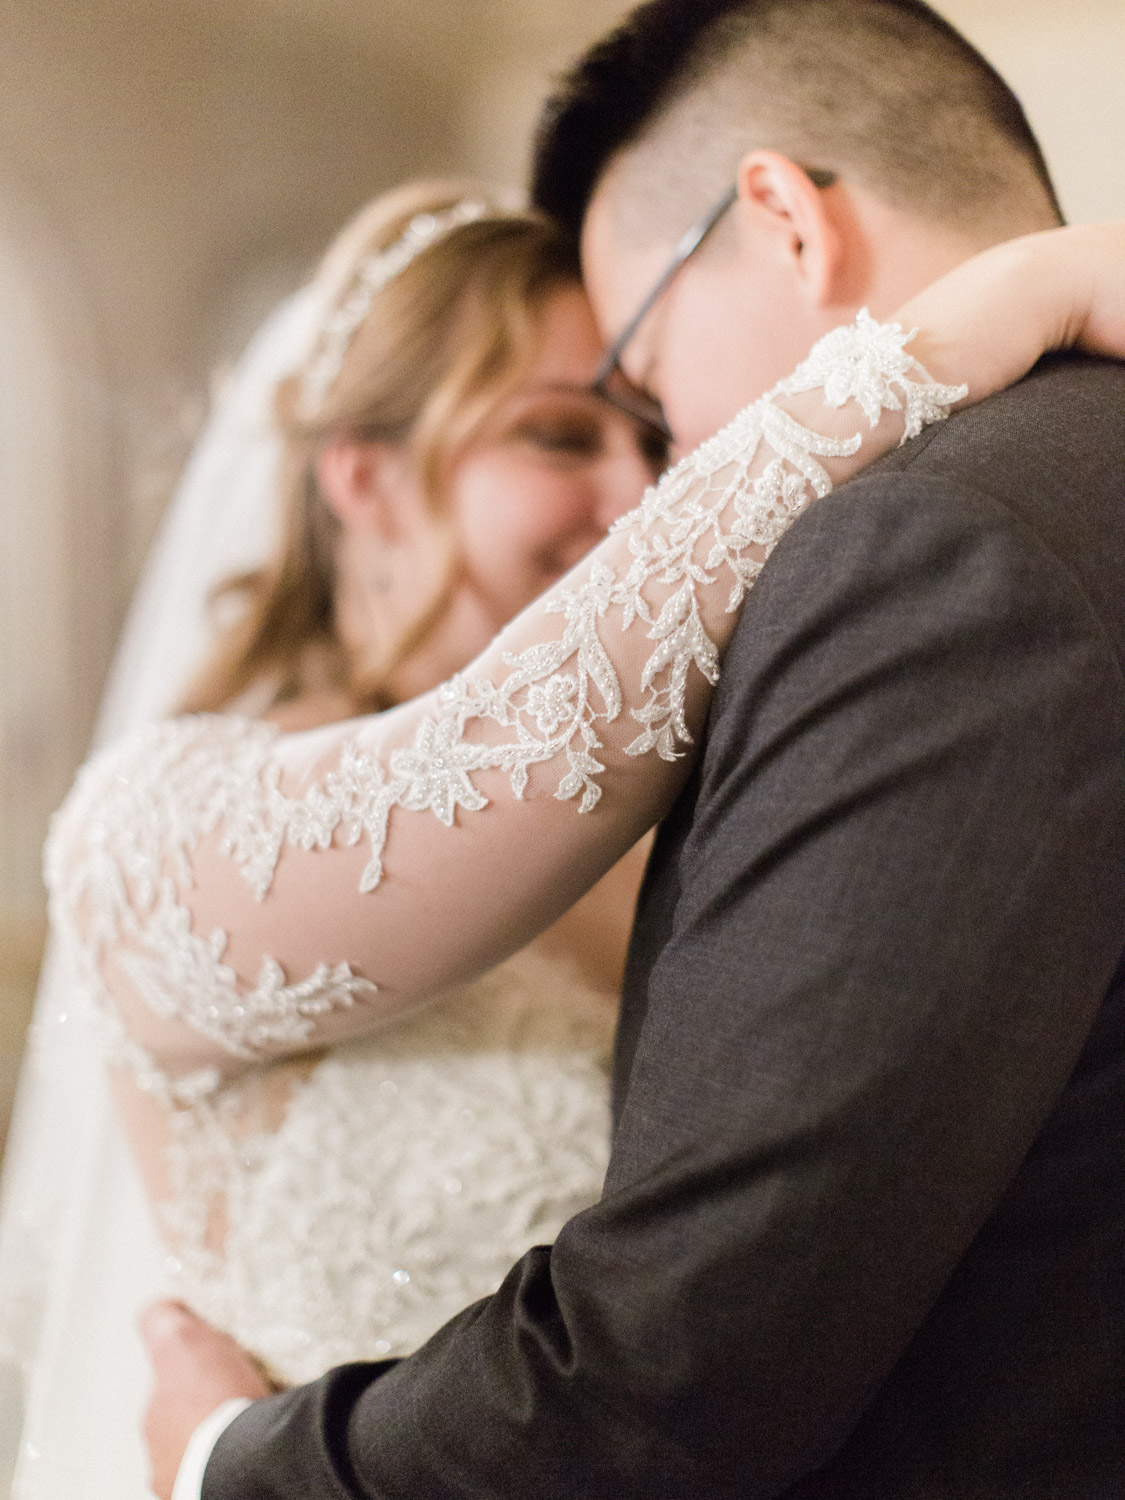 Timeless winter wedding photographs at one king west hotel, by toronto photographer corynn fowler photography